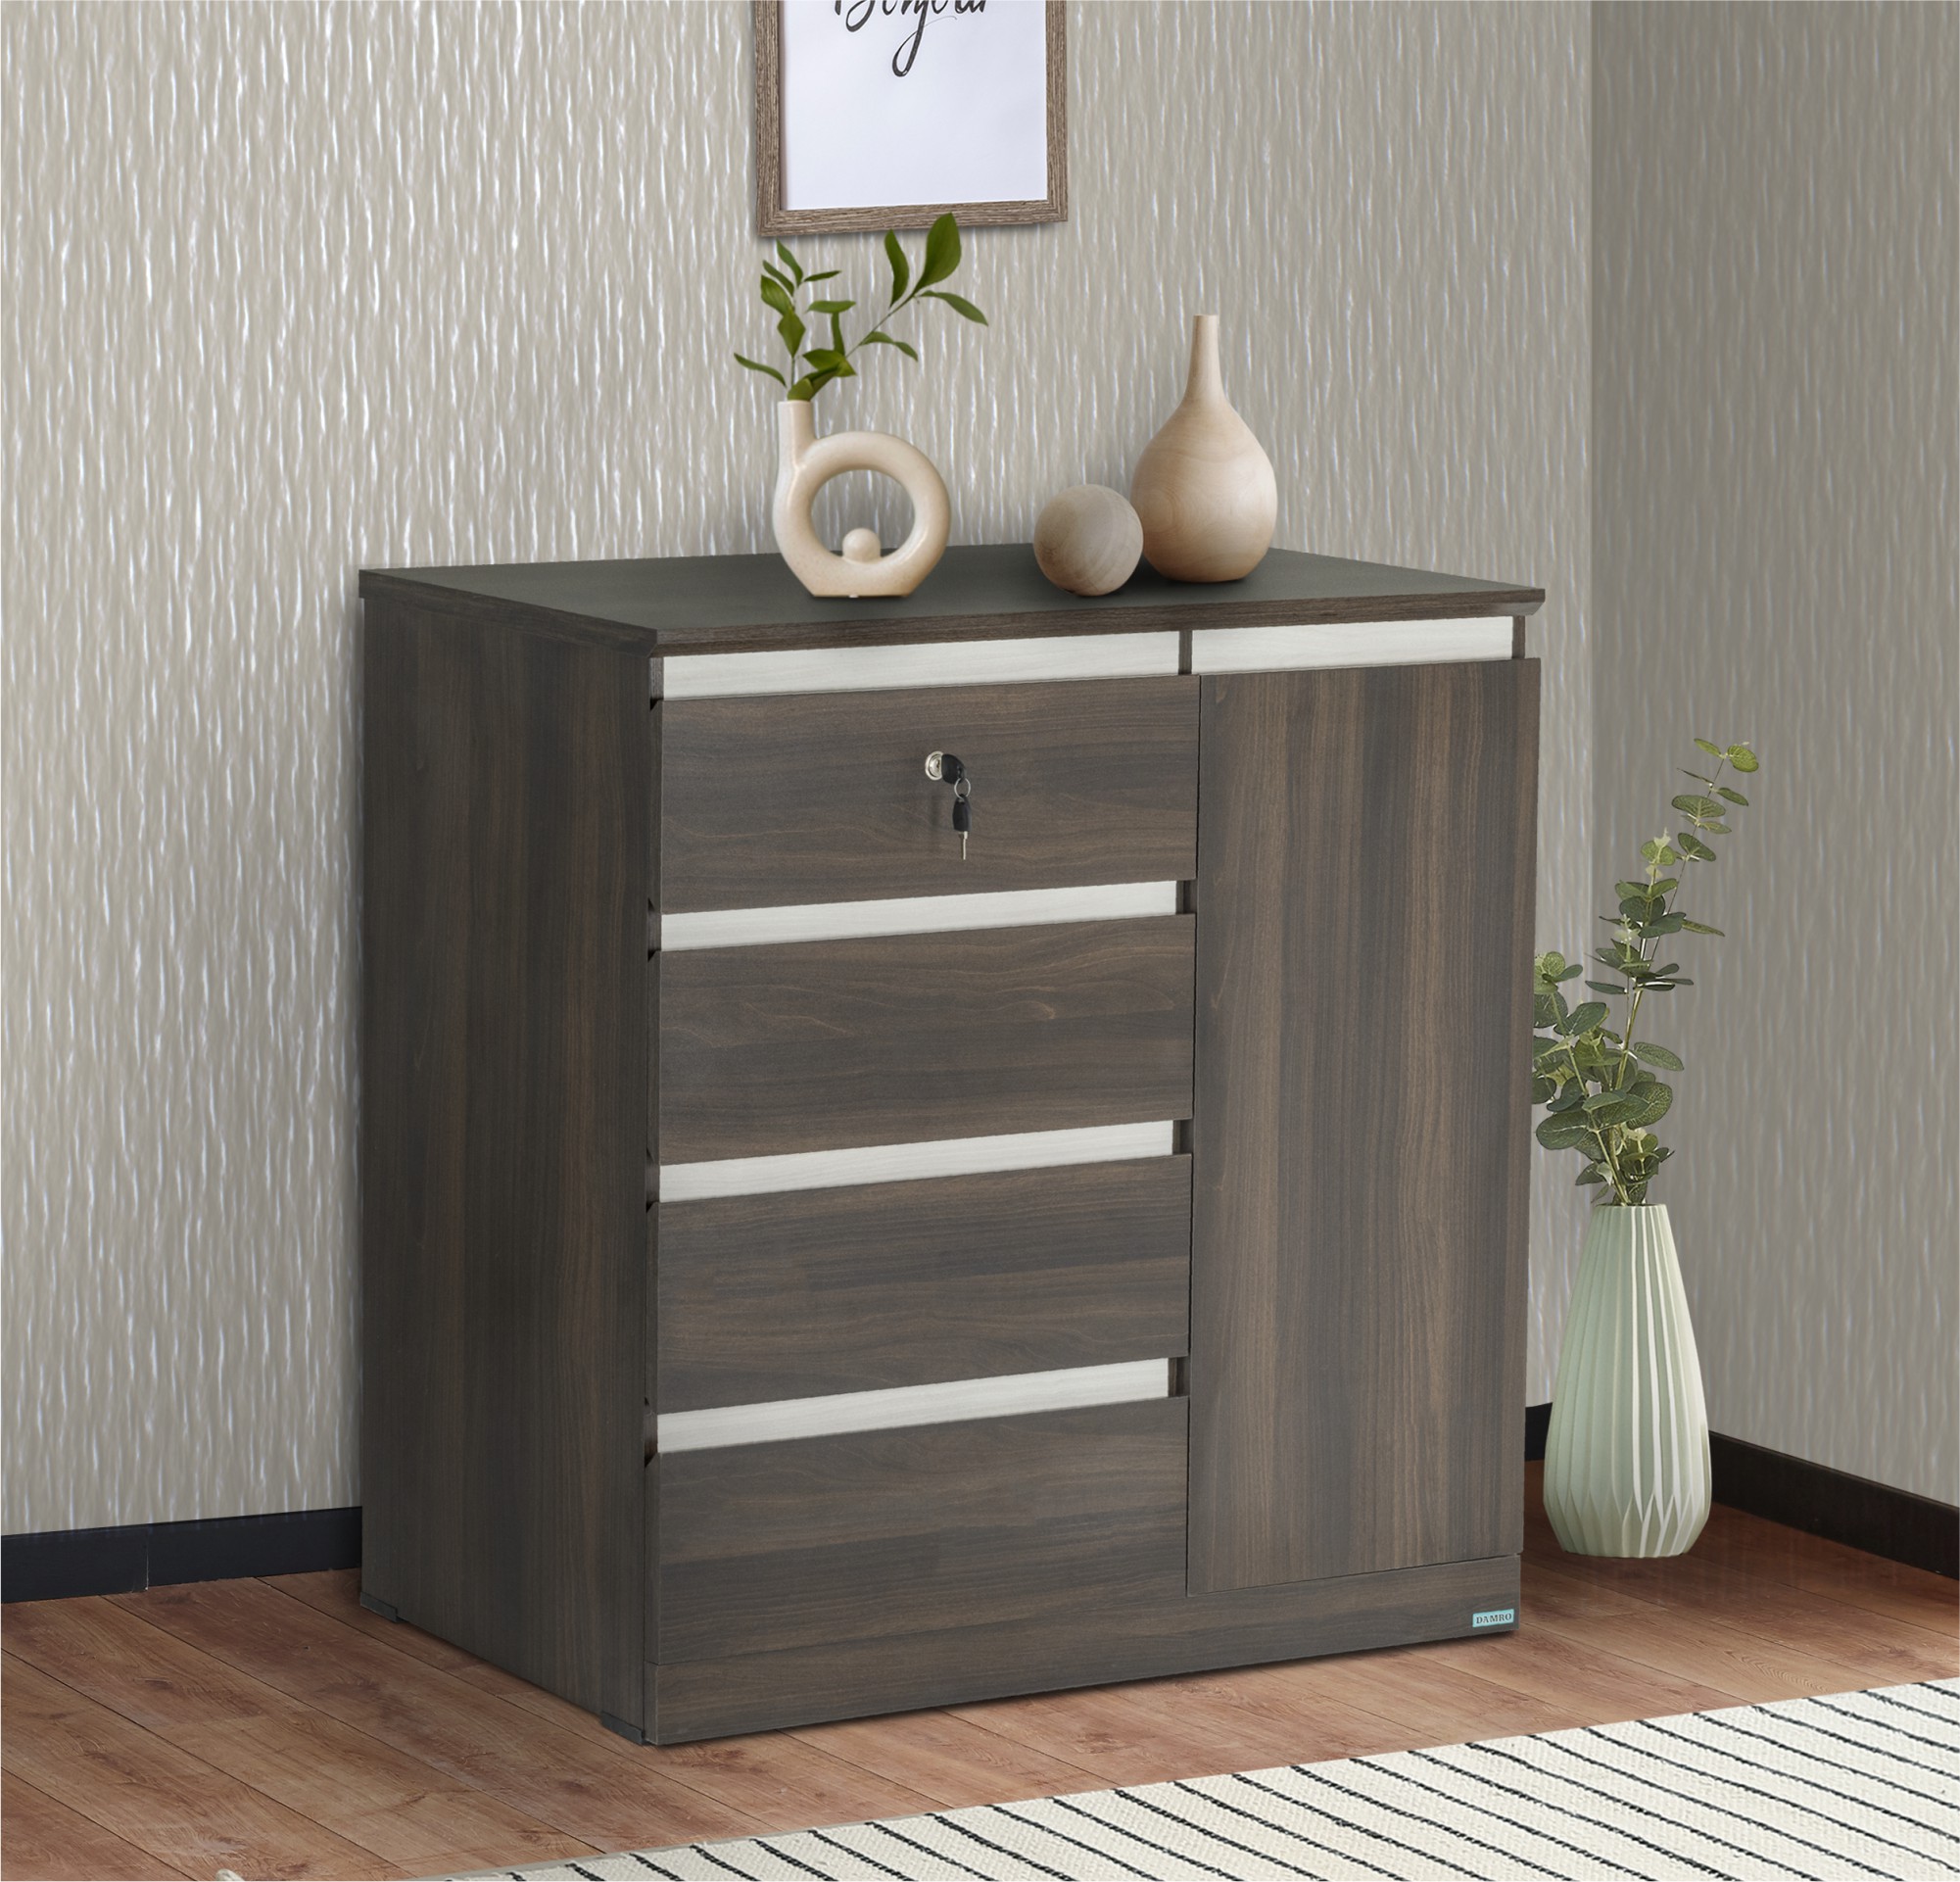 KDR008-Chest Of Drawers With 4 Drawers-M42/M41